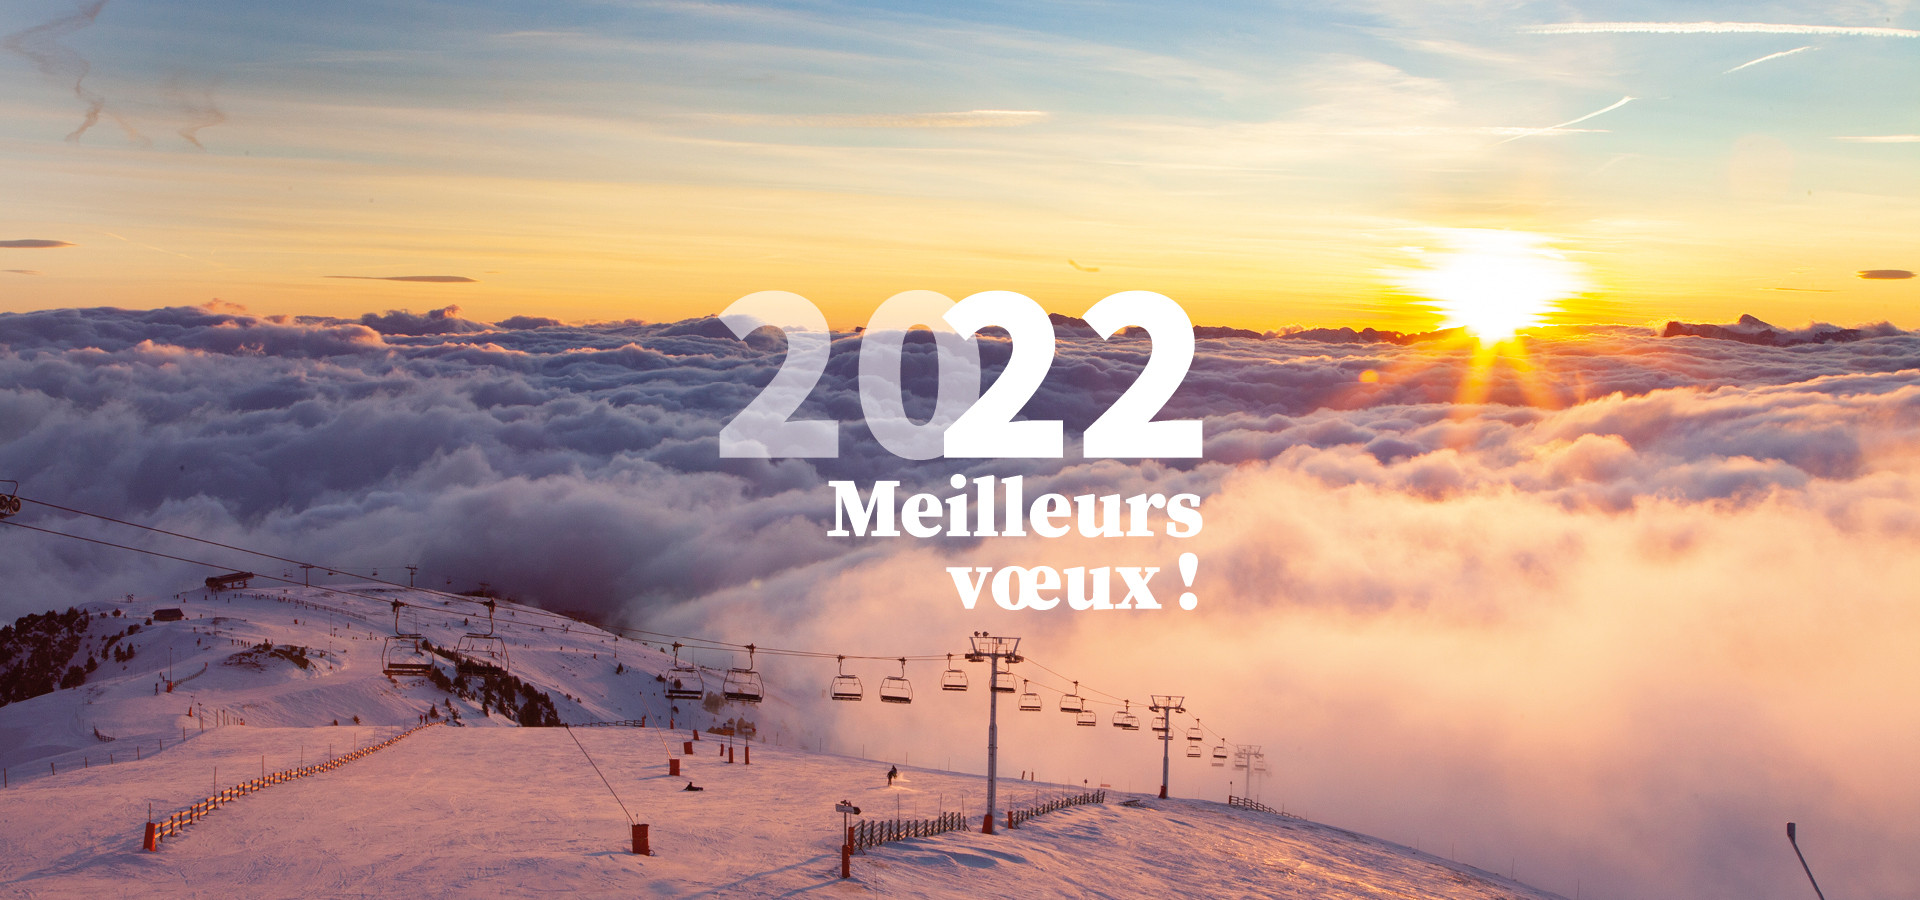 Happy new year 2022 in Chamrousse!